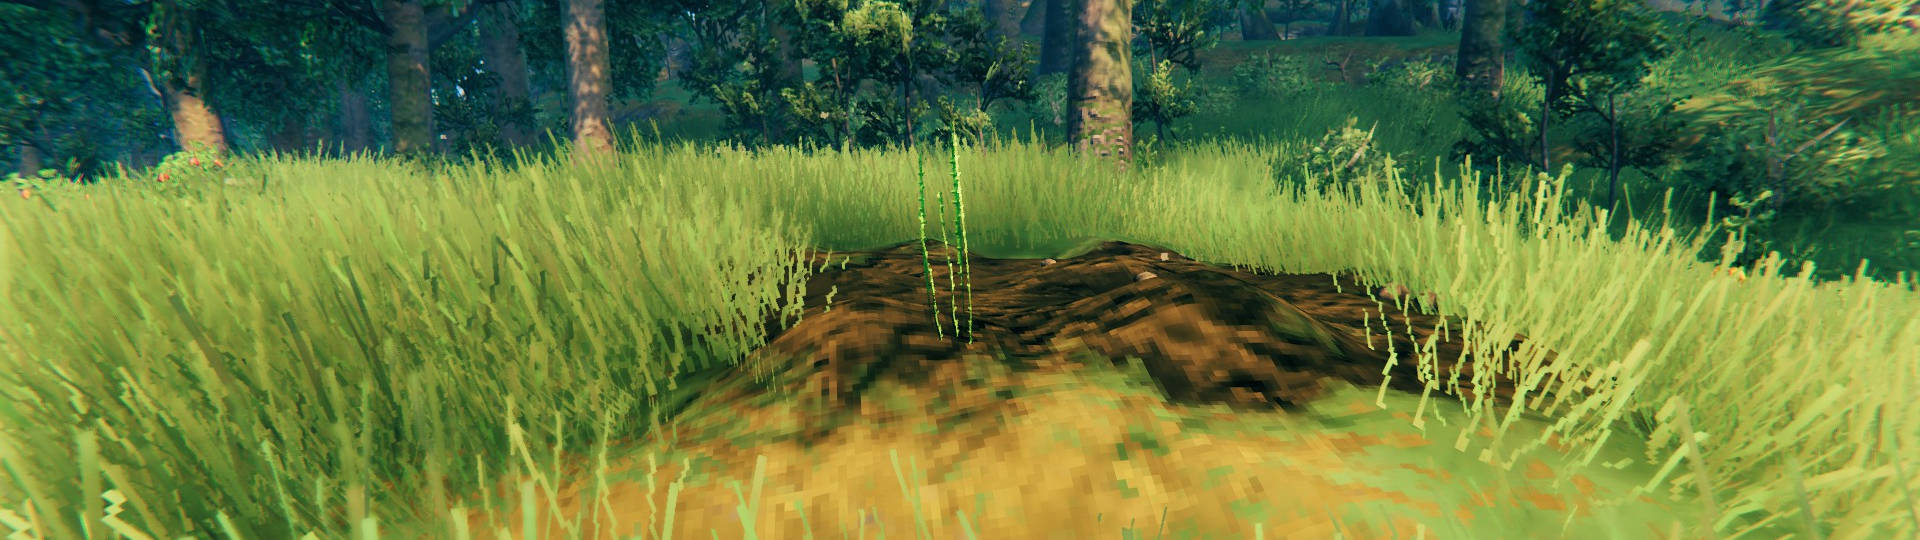 This Week in Valheim March 27 Plant Anywhere